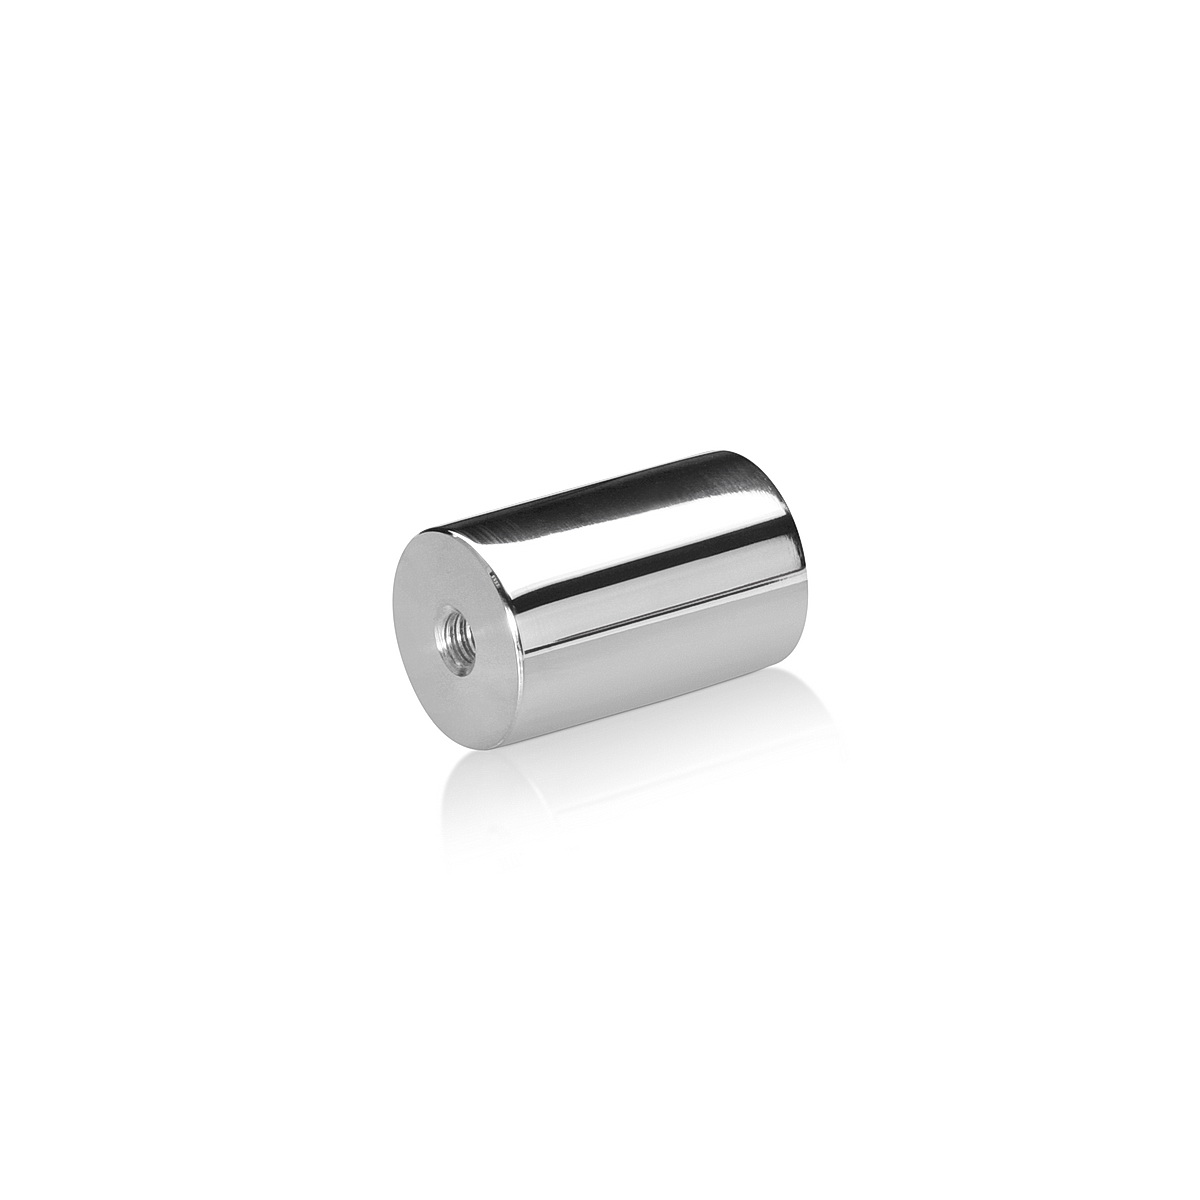 1/4-20 Threaded Barrels Diameter: 1'', Length: 1 1/2'', Polished Finish Grade 304 [Required Material Hole Size: 17/64'' ]